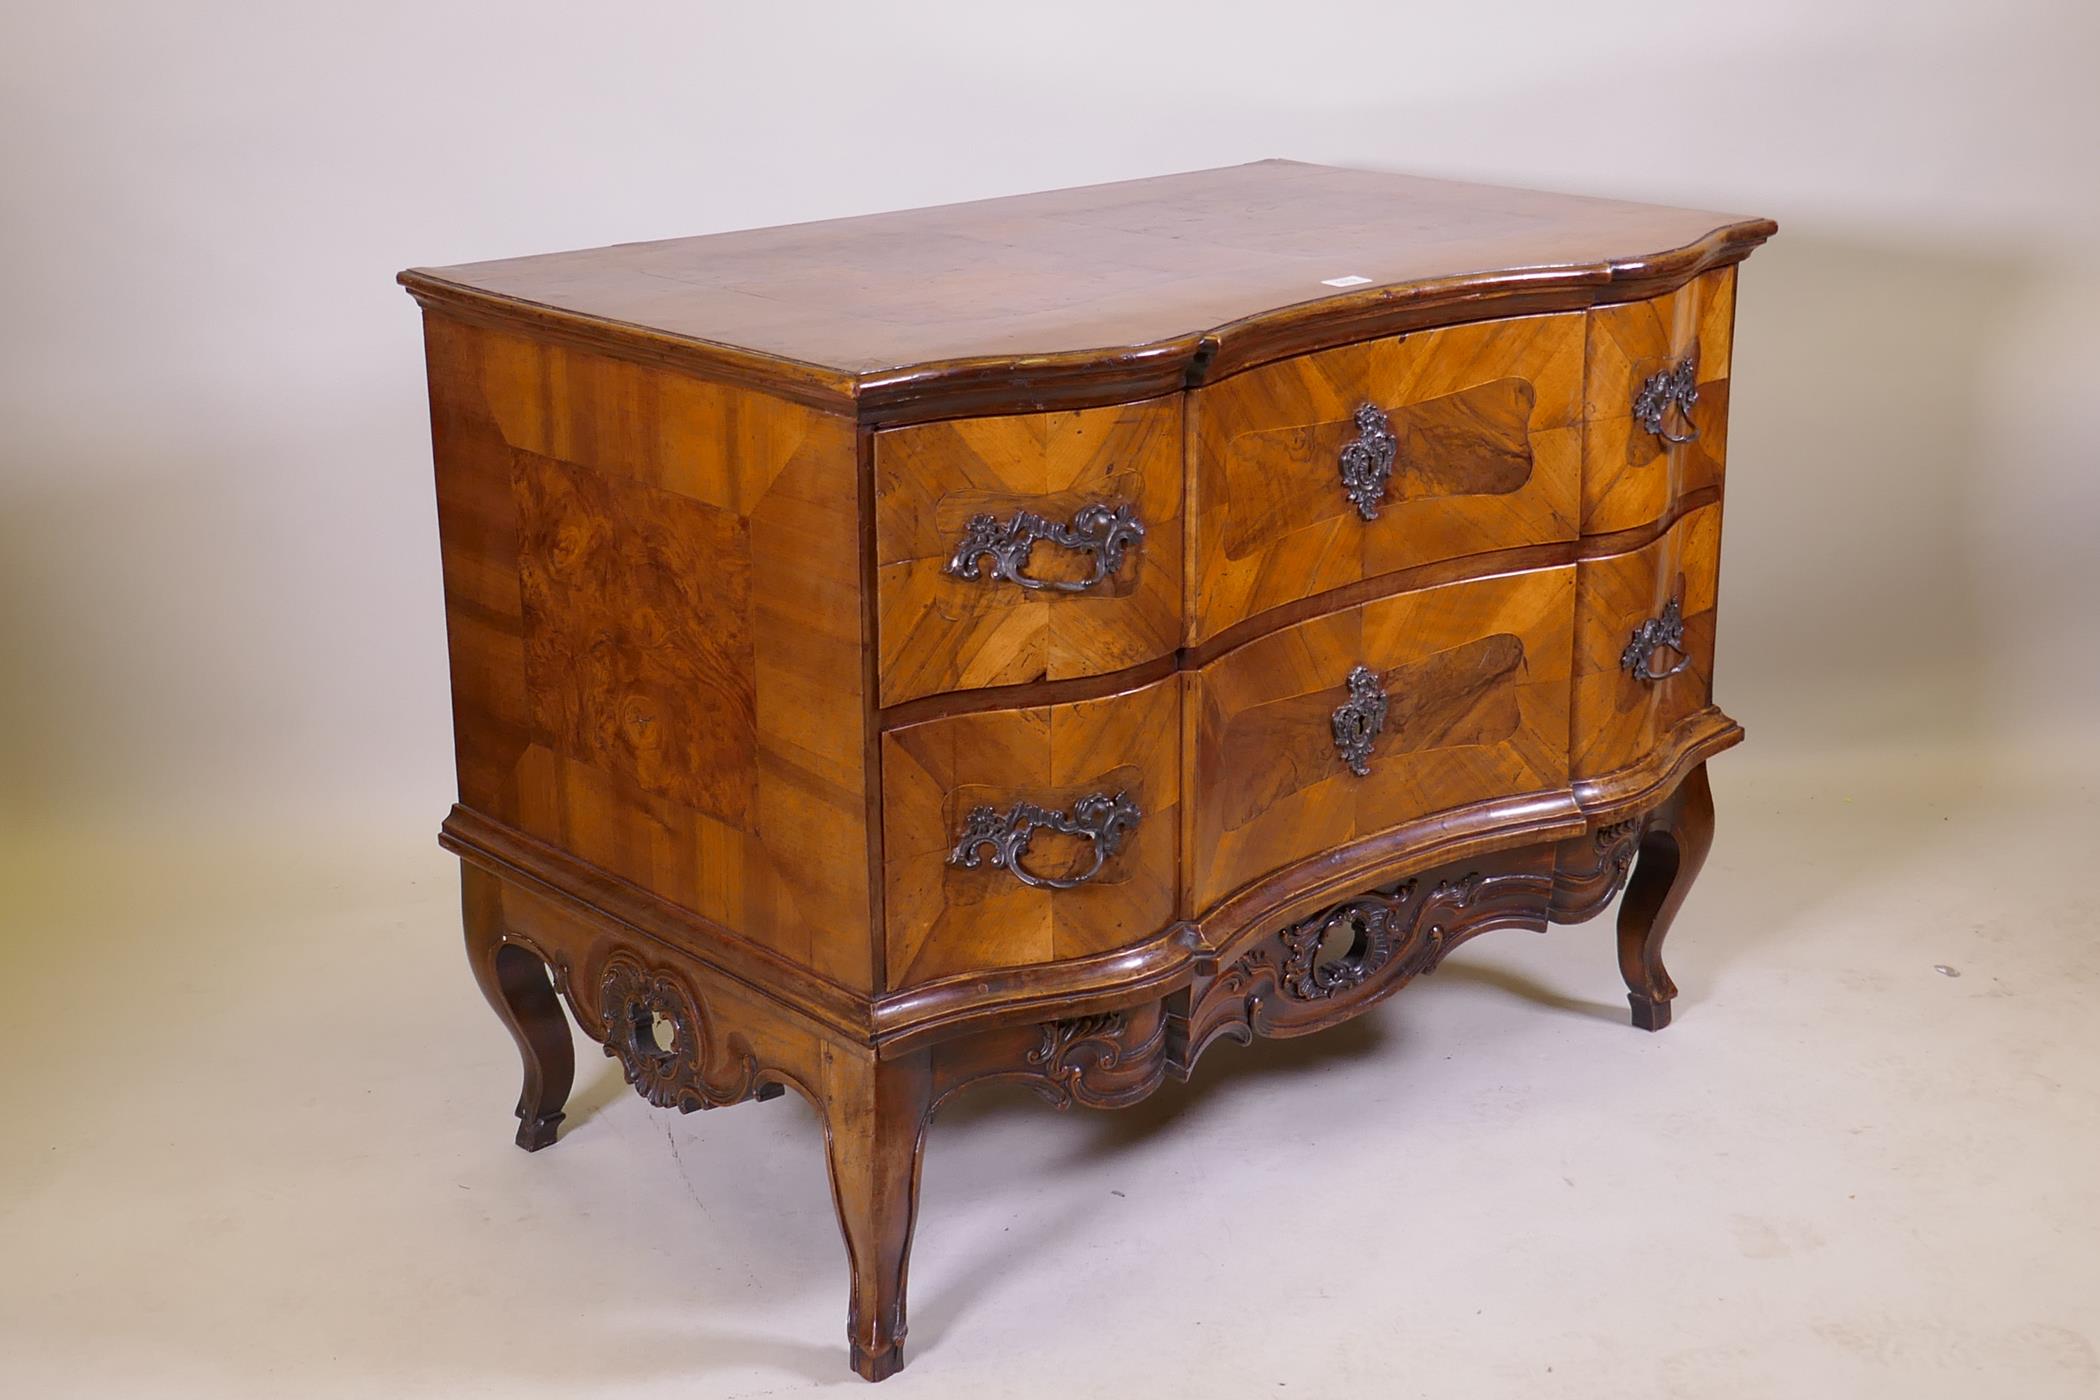 A late C18th/early C19th Maltese serpentine fronted walnut commode with two drawers, raised on a - Image 7 of 13